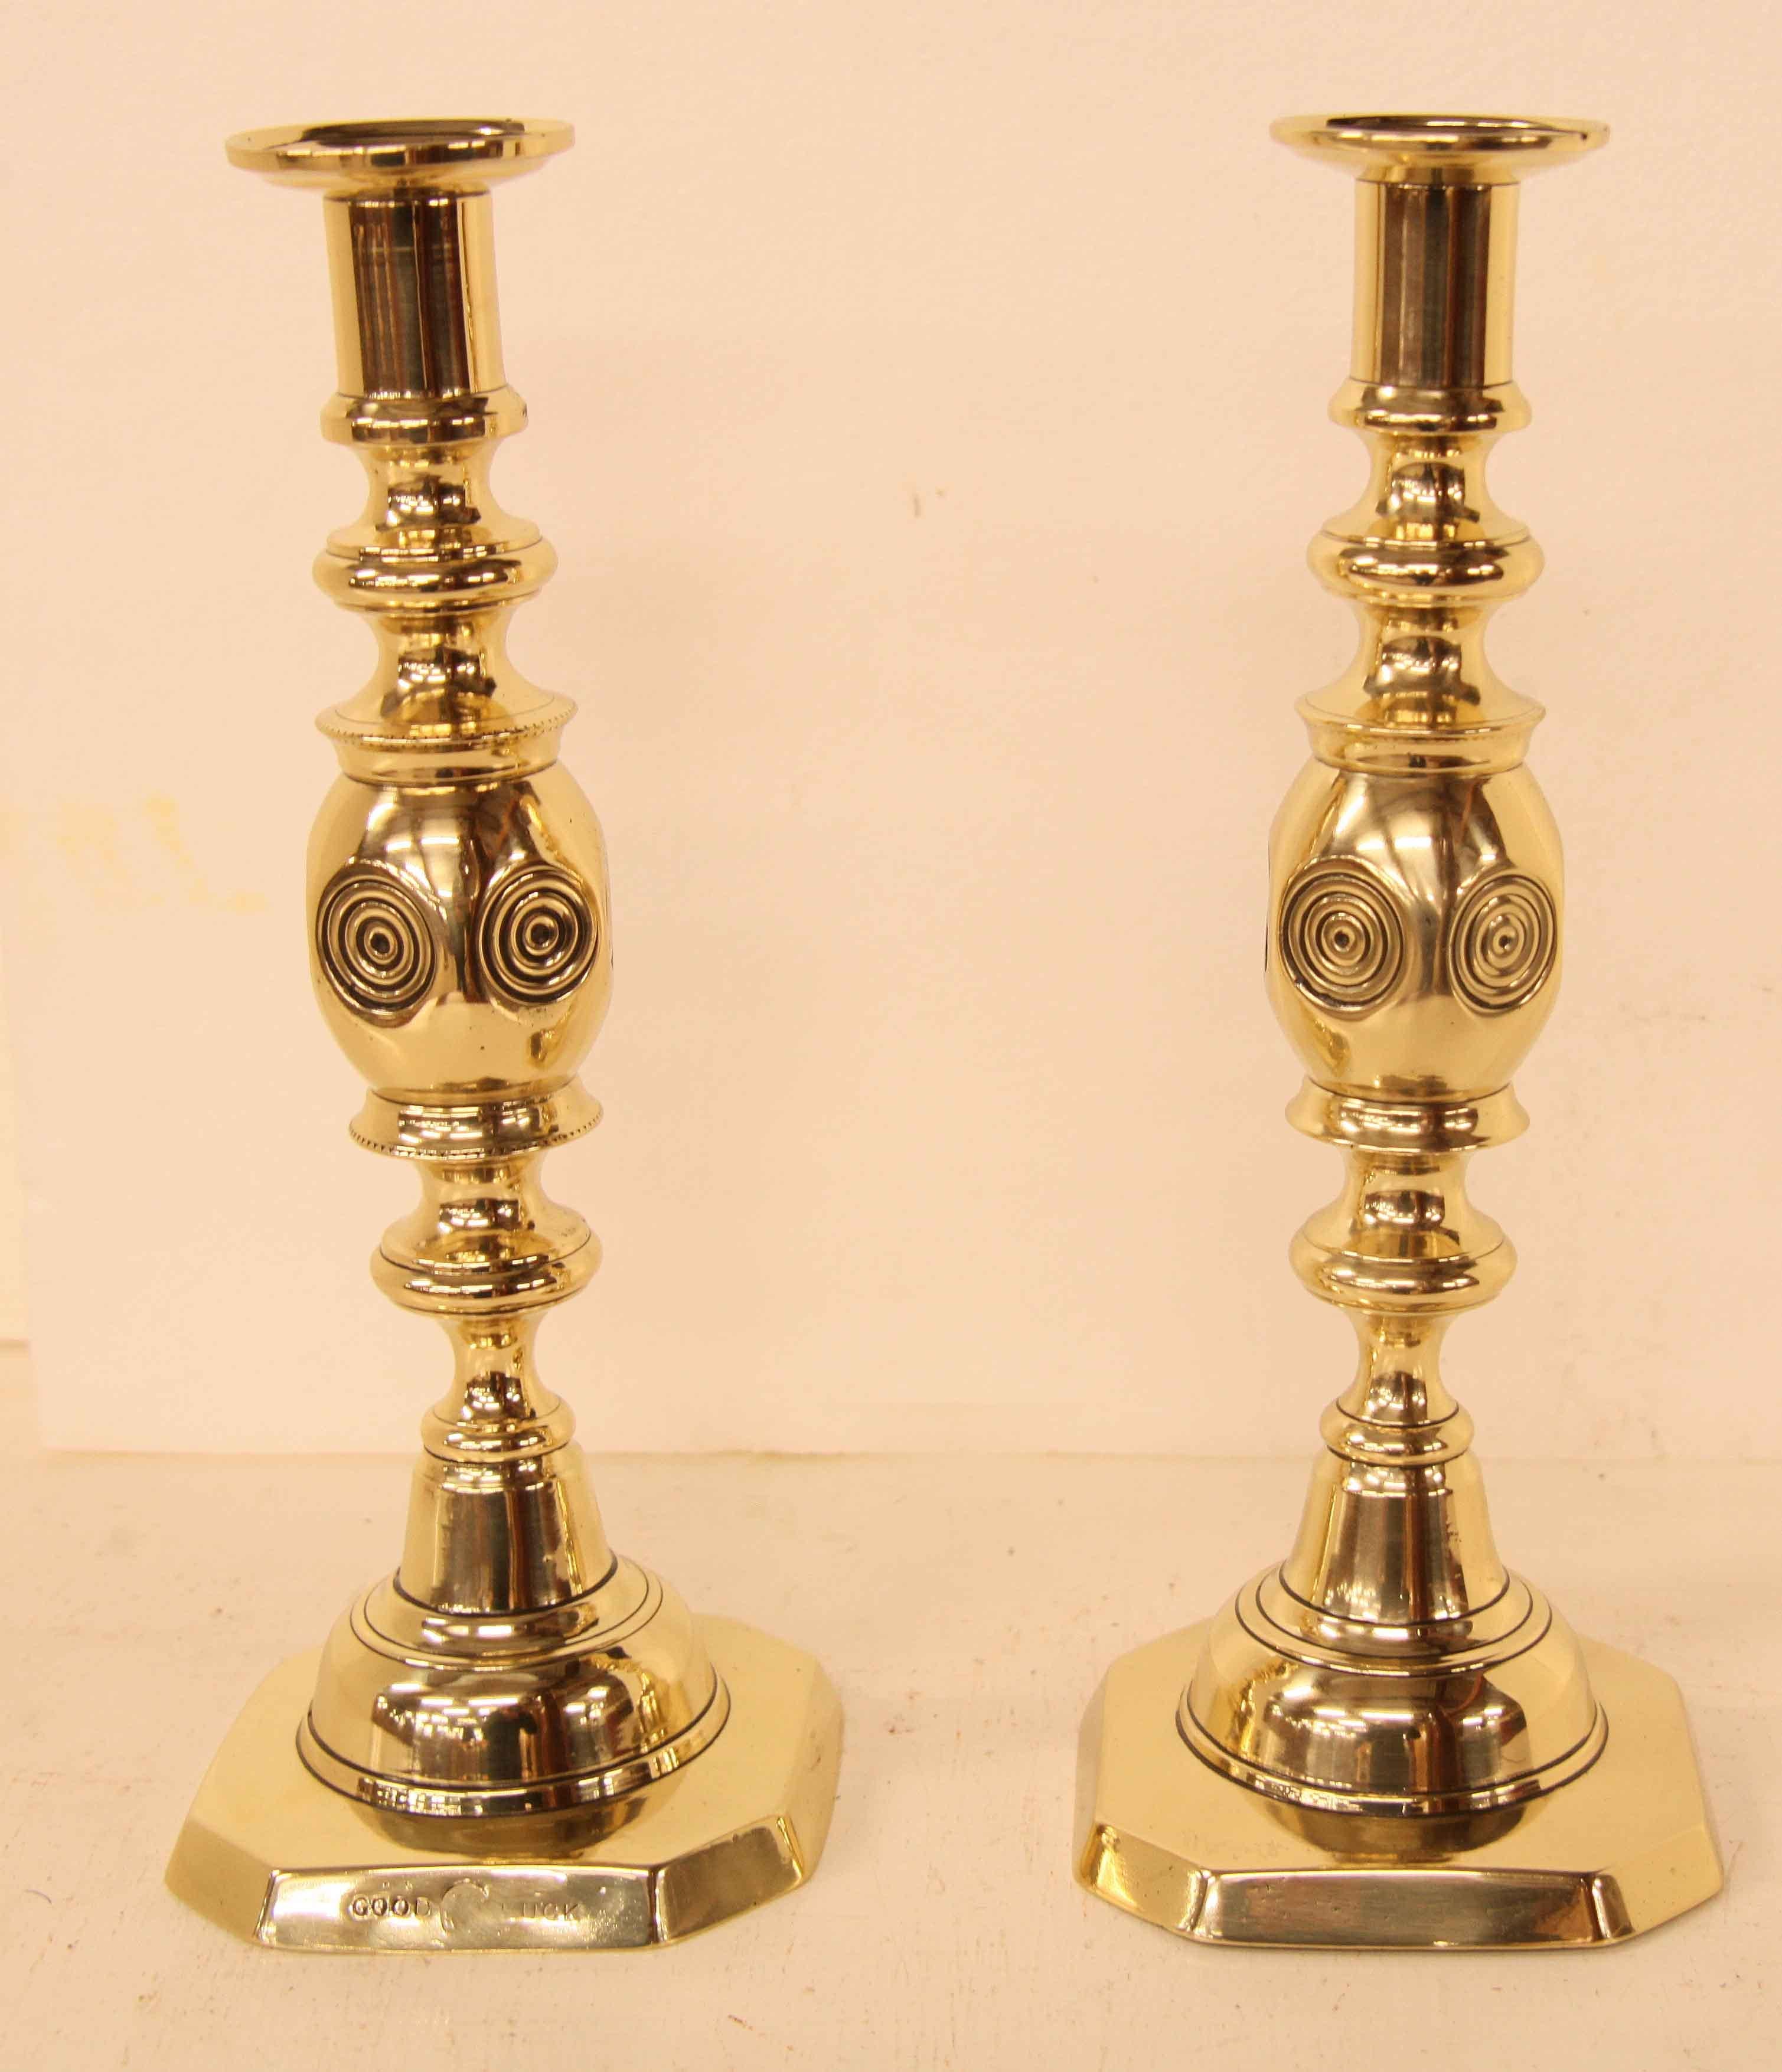 Pair of brass ''bull's eye'' candlesticks,  these English candlesticks are aptly named for the central feature that resembles a bull's eye.  They have the ''GOOD LUCK'' mark at the bottom in honor of Queen Victoria's jubilee;  they retain their push